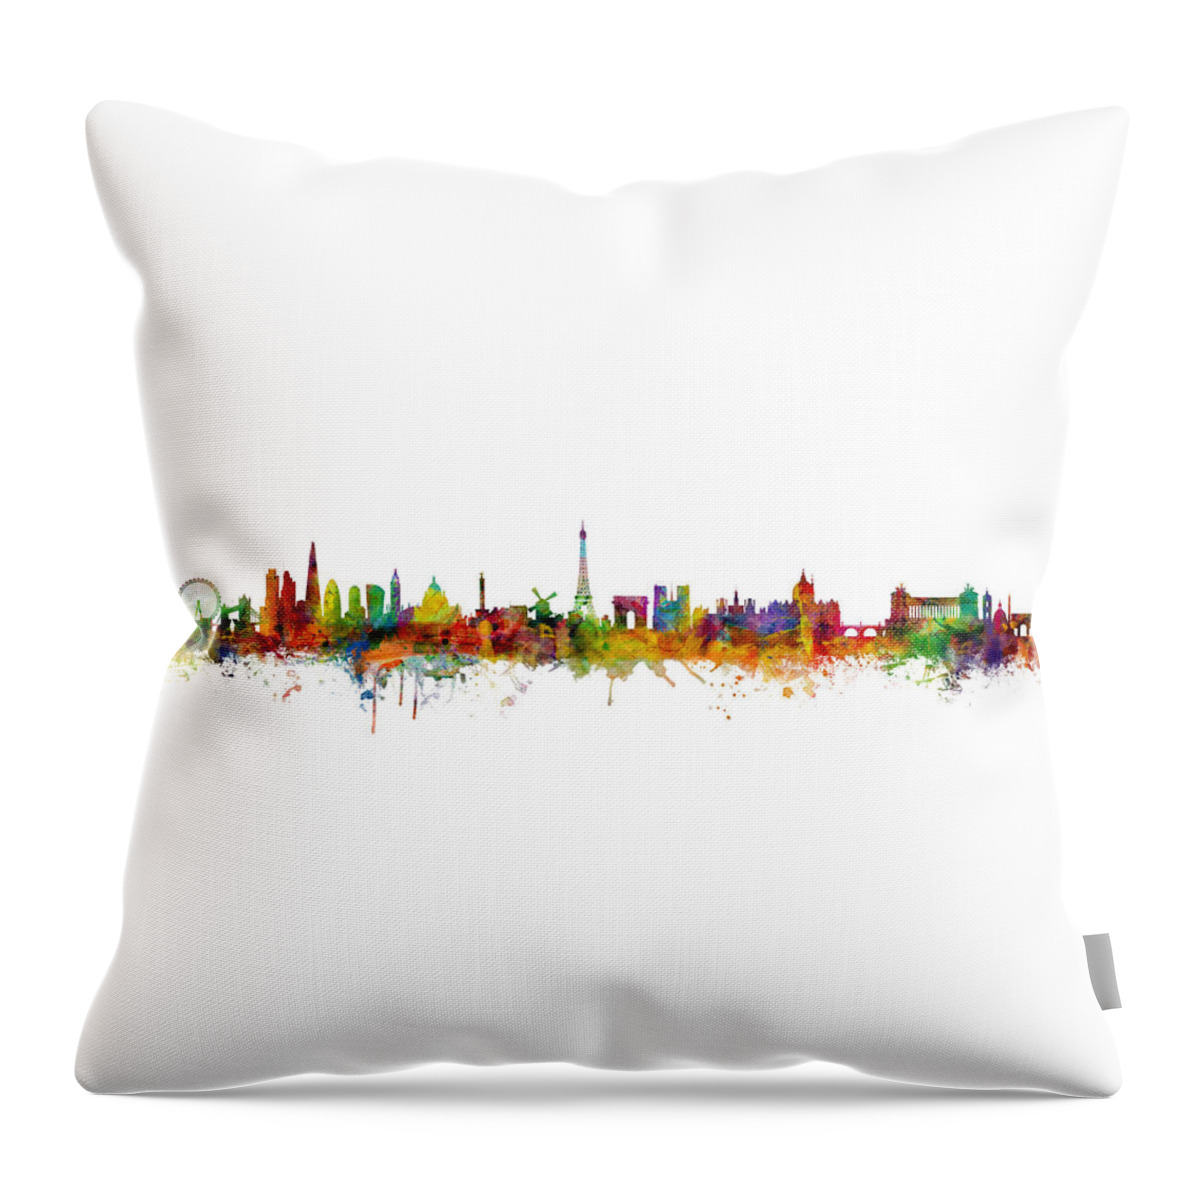 Rome Throw Pillow featuring the digital art London, Paris and Rome Skylines Mashup by Michael Tompsett